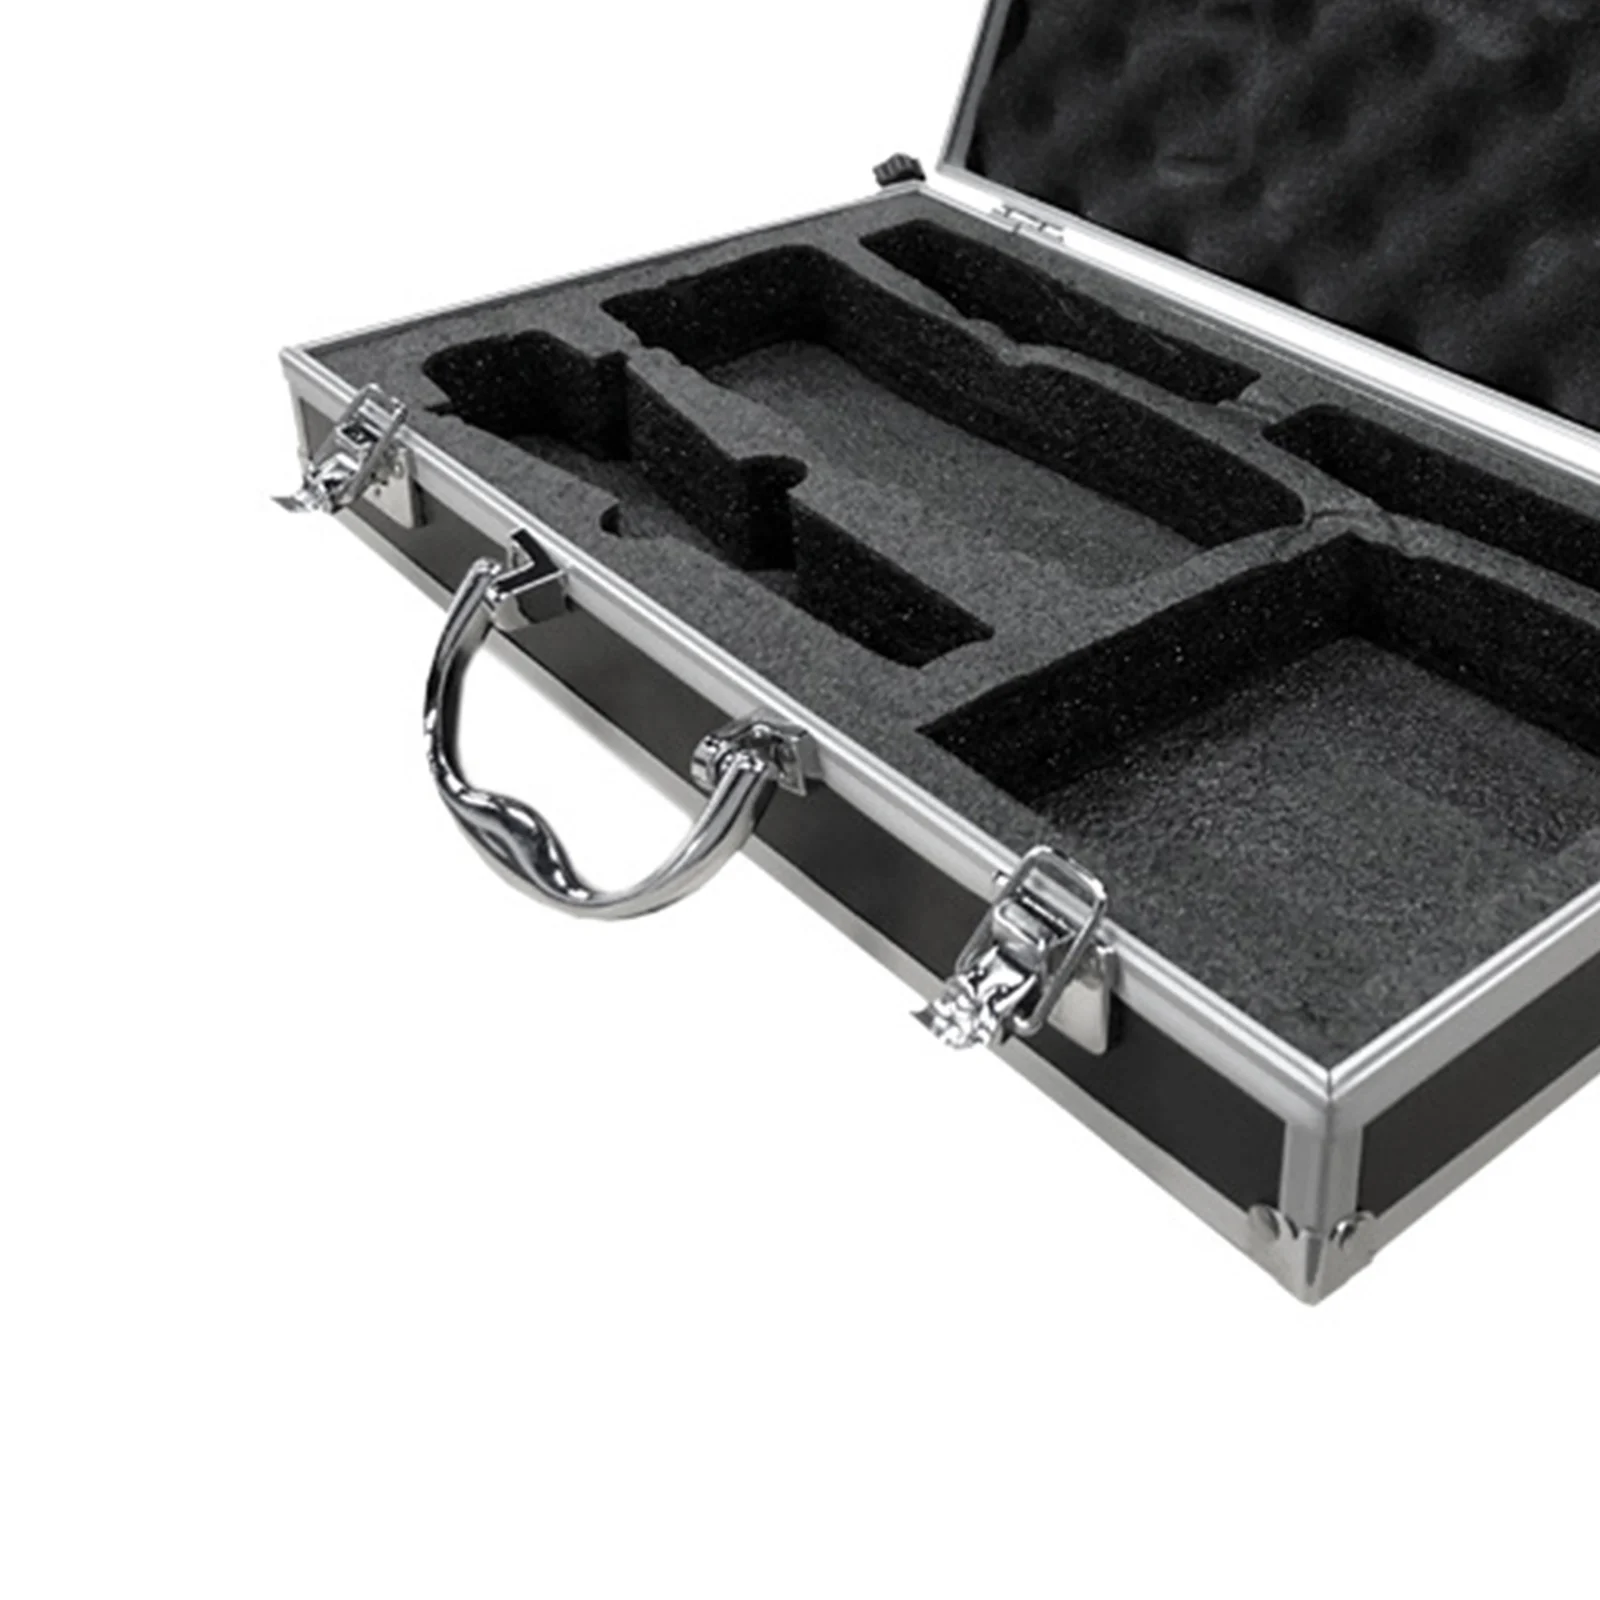 Portable Microphone Carrying Case Instrument Box with Sponge for Microphone Sound Card